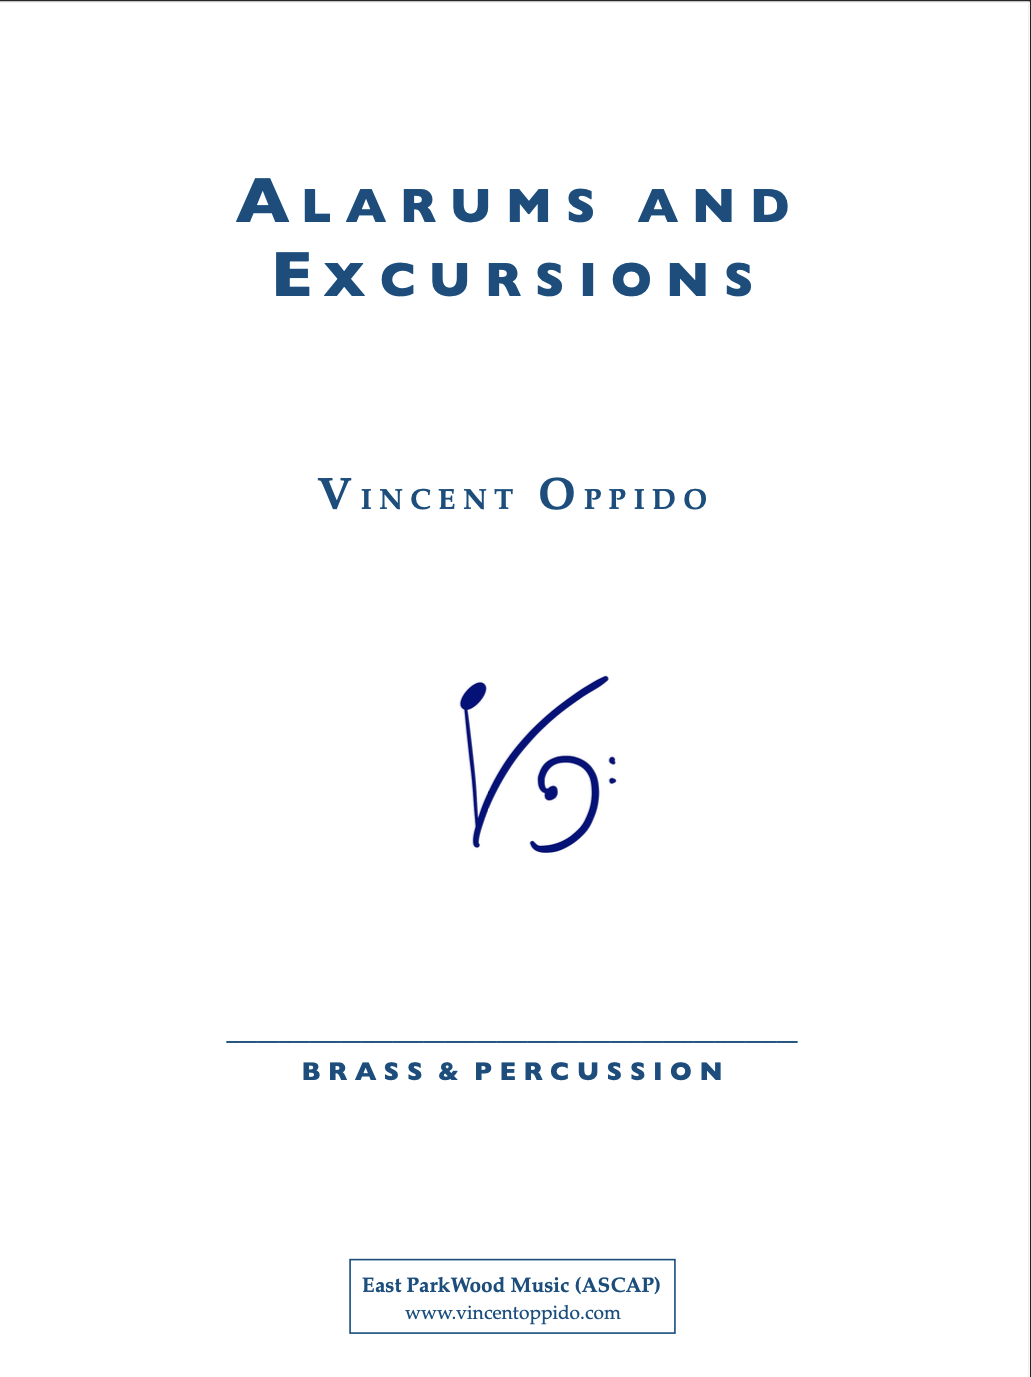 Alarums And Excursions by Vincent Oppido